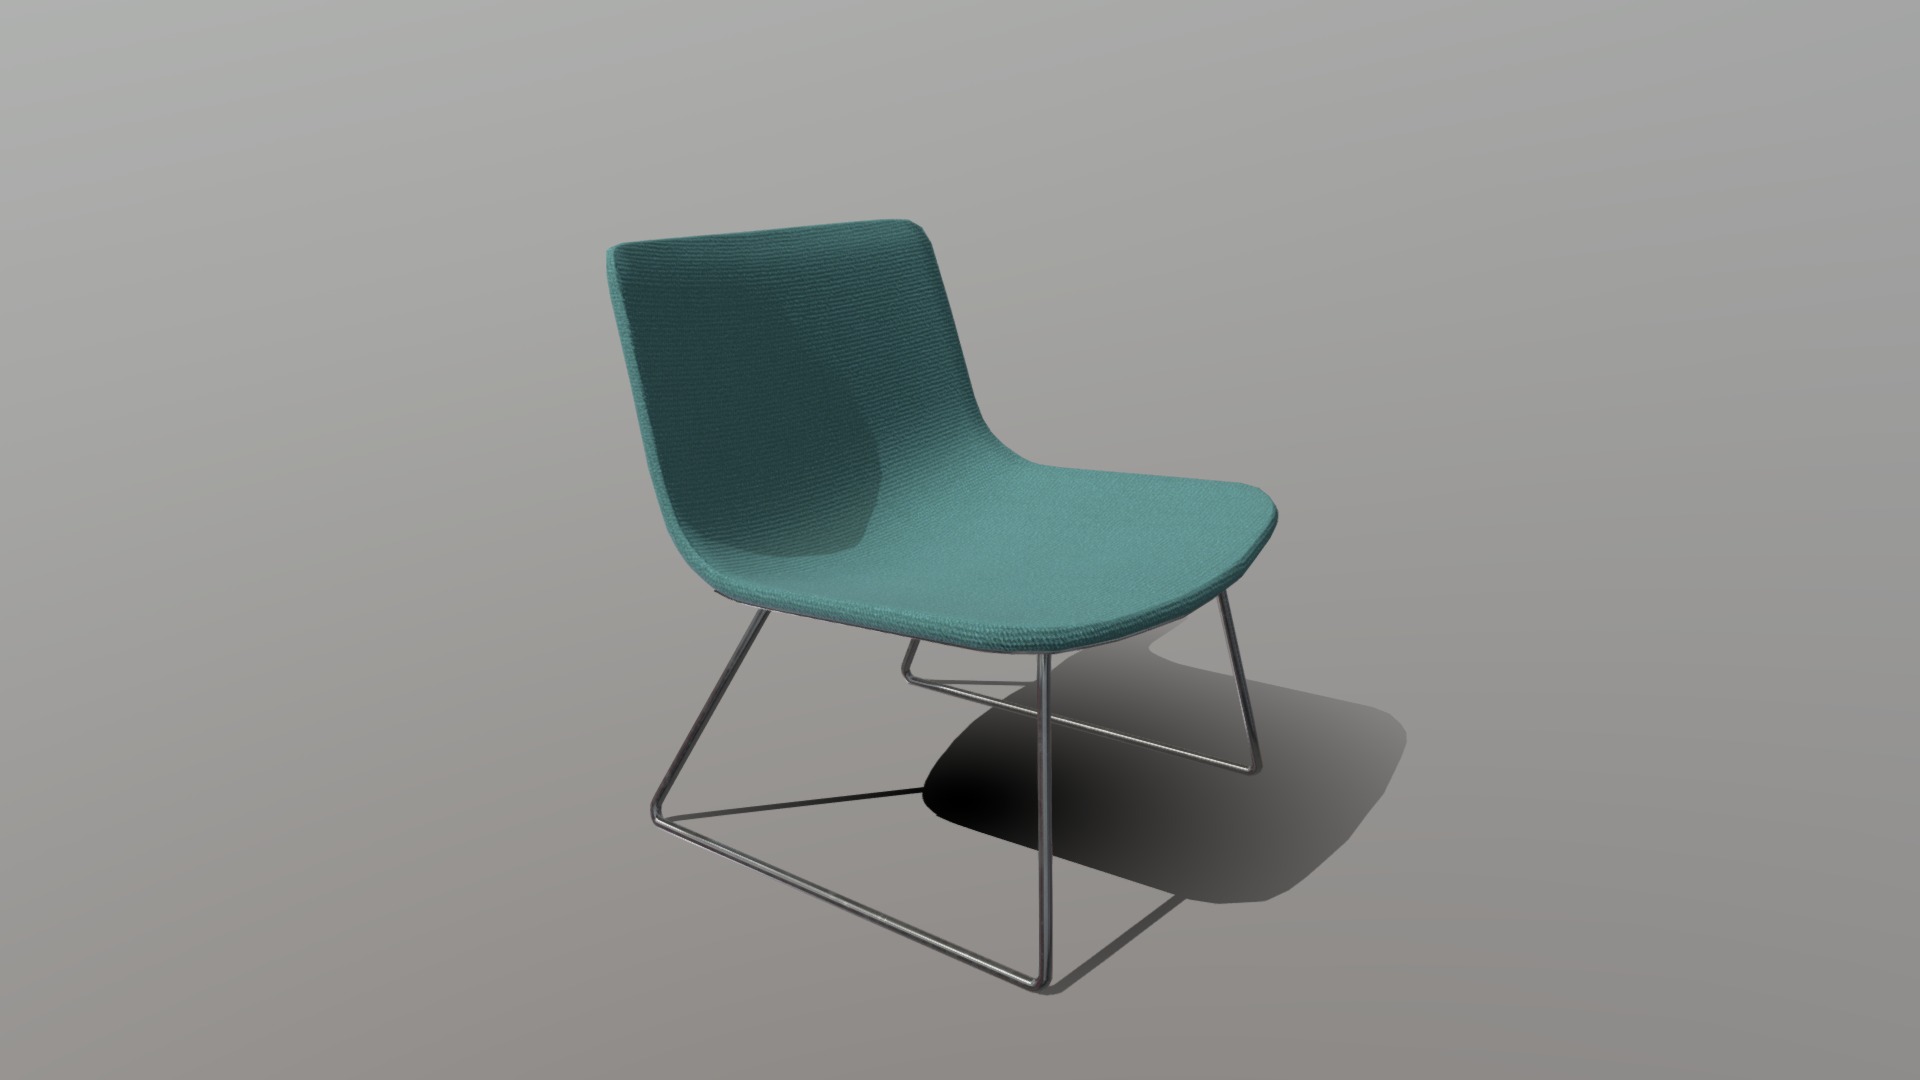 3D model PATO LOUNGE SLEDGE-MODEL 4372 Chrome v-01 - This is a 3D model of the PATO LOUNGE SLEDGE-MODEL 4372 Chrome v-01. The 3D model is about a chair on a white background.